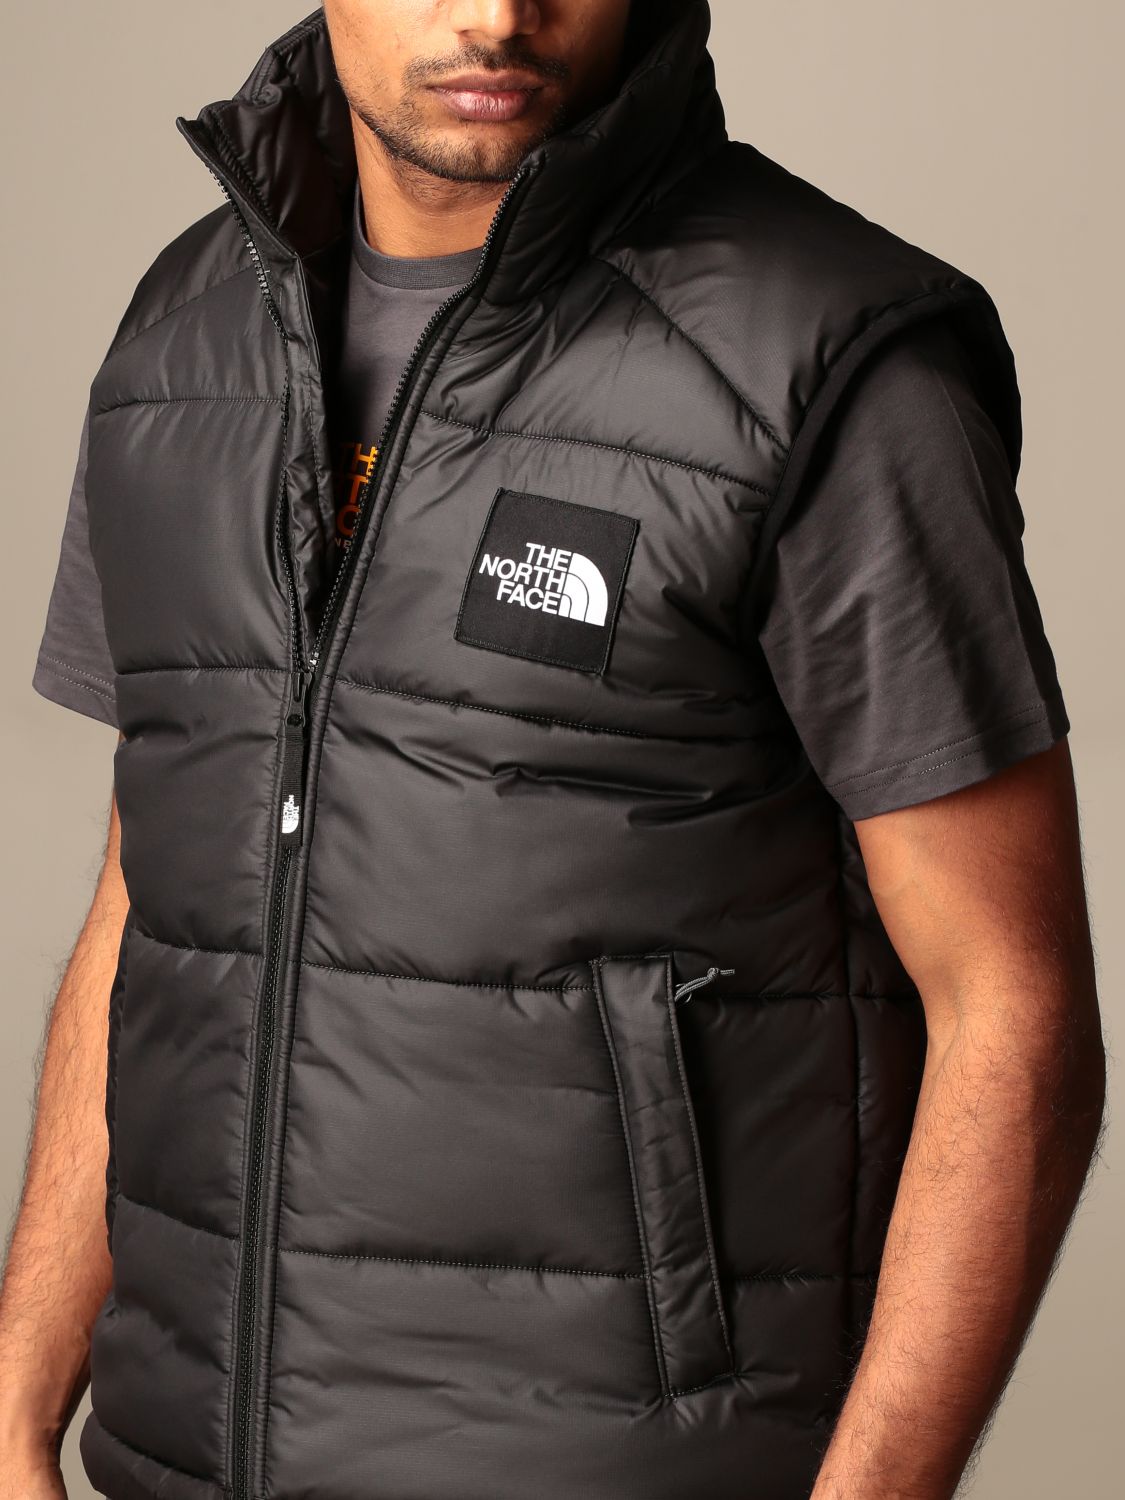 hooded north face vest